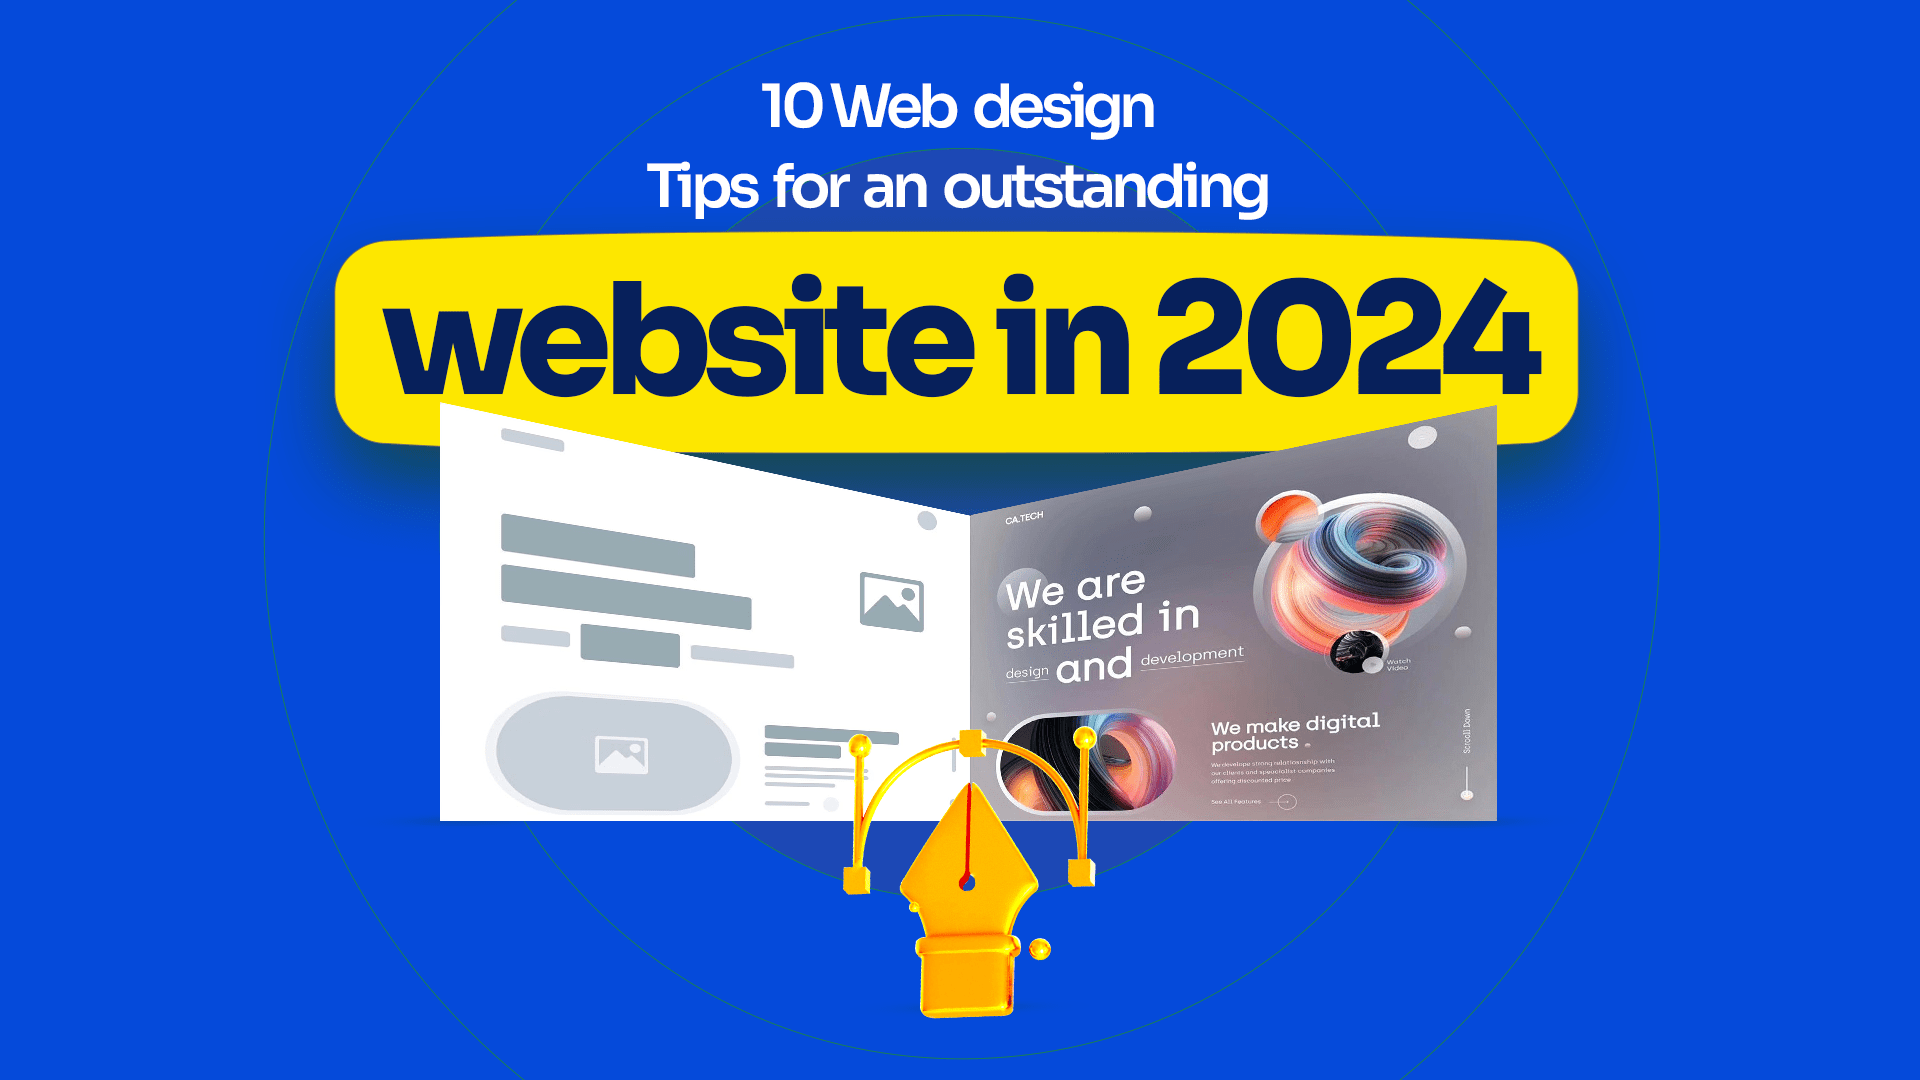 10 Web Design Tips For An Outstanding Website in 2024